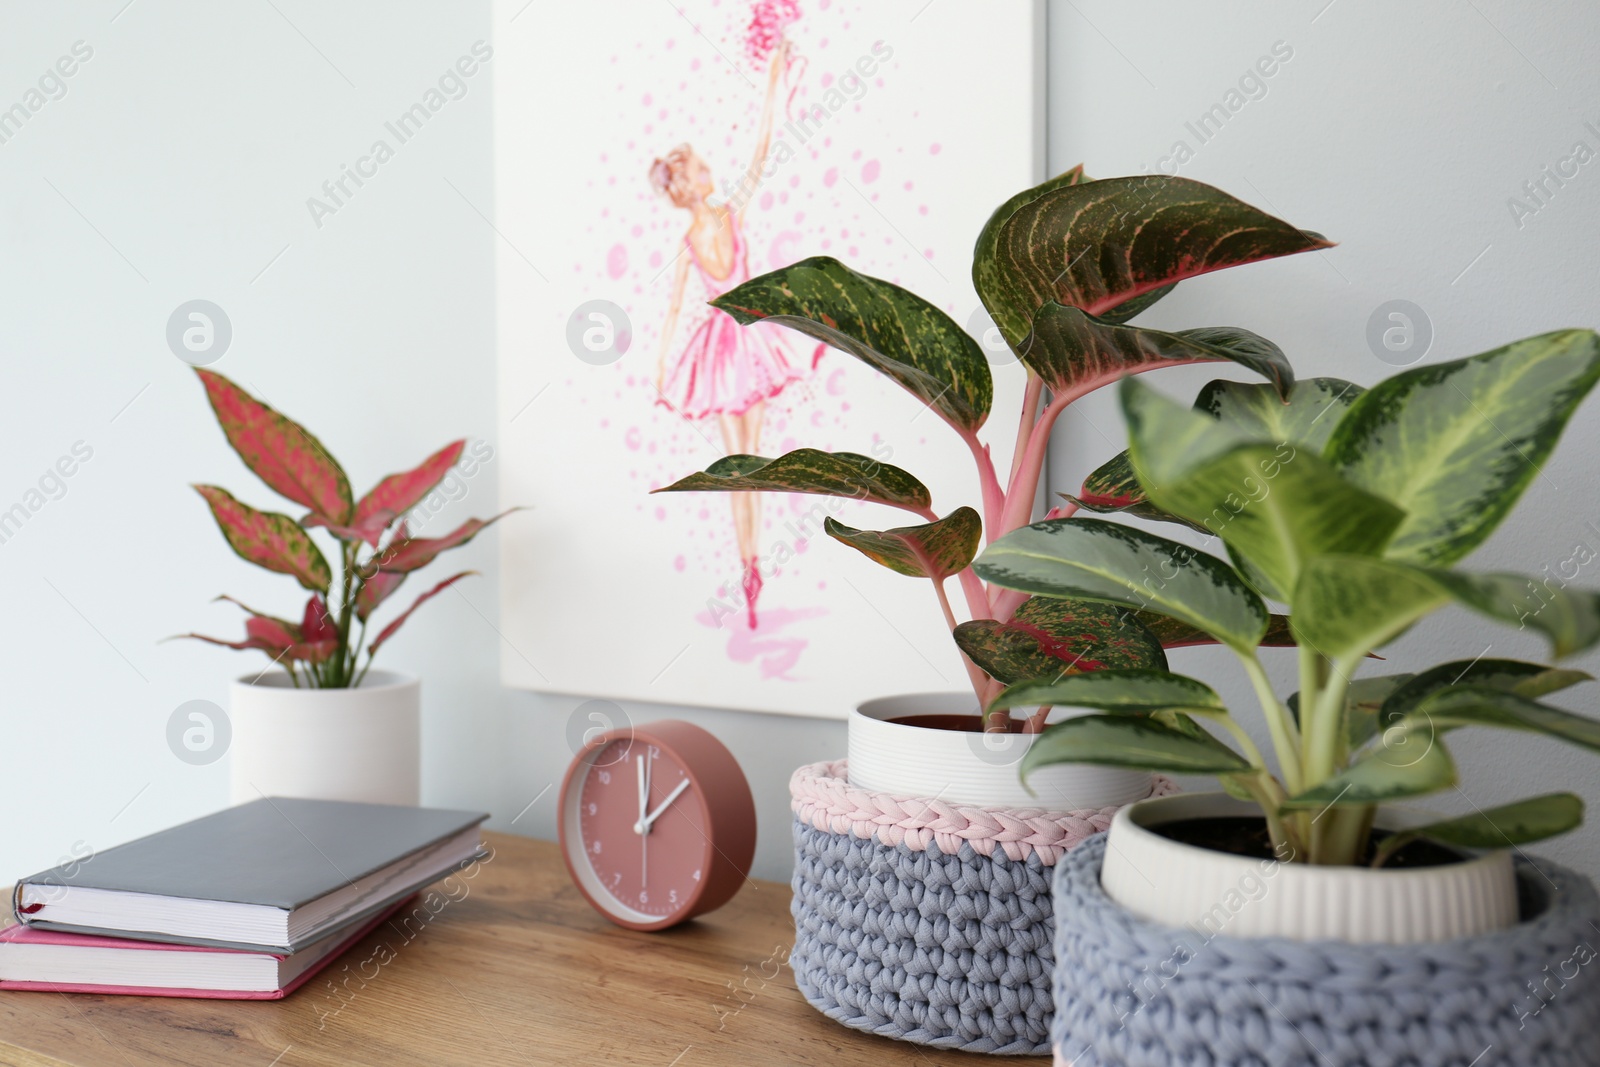 Photo of Different exotic houseplants on table in room